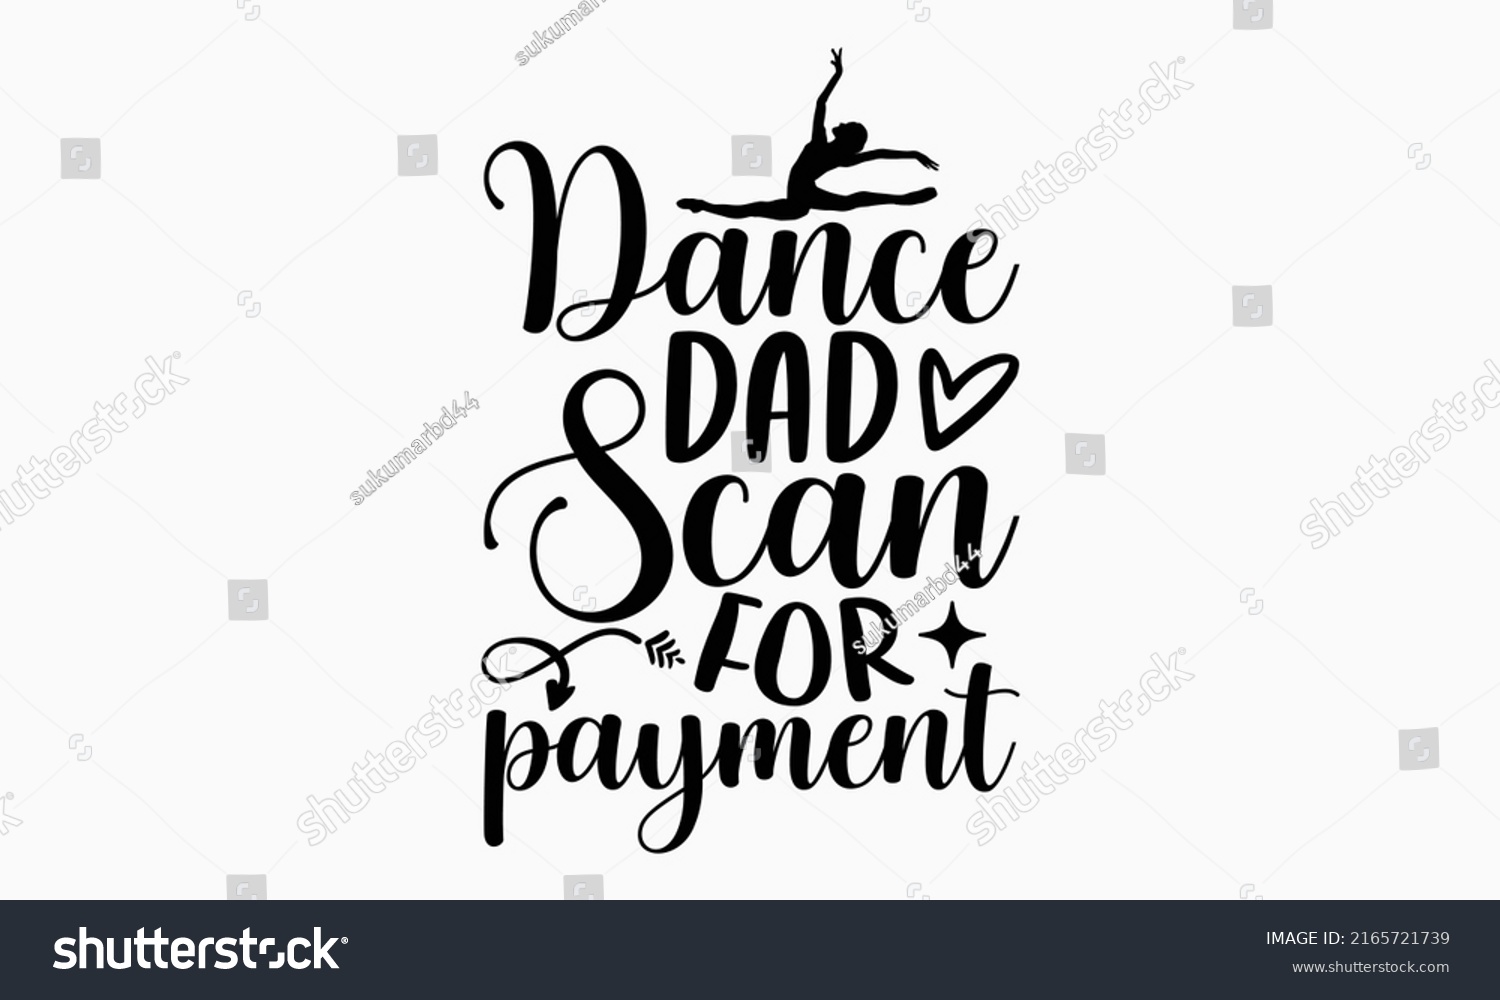 SVG of Dance dad scan for payment - Ballet t shirt design, SVG Files for Cutting, Handmade calligraphy vector illustration, Hand written vector sign, EPS svg